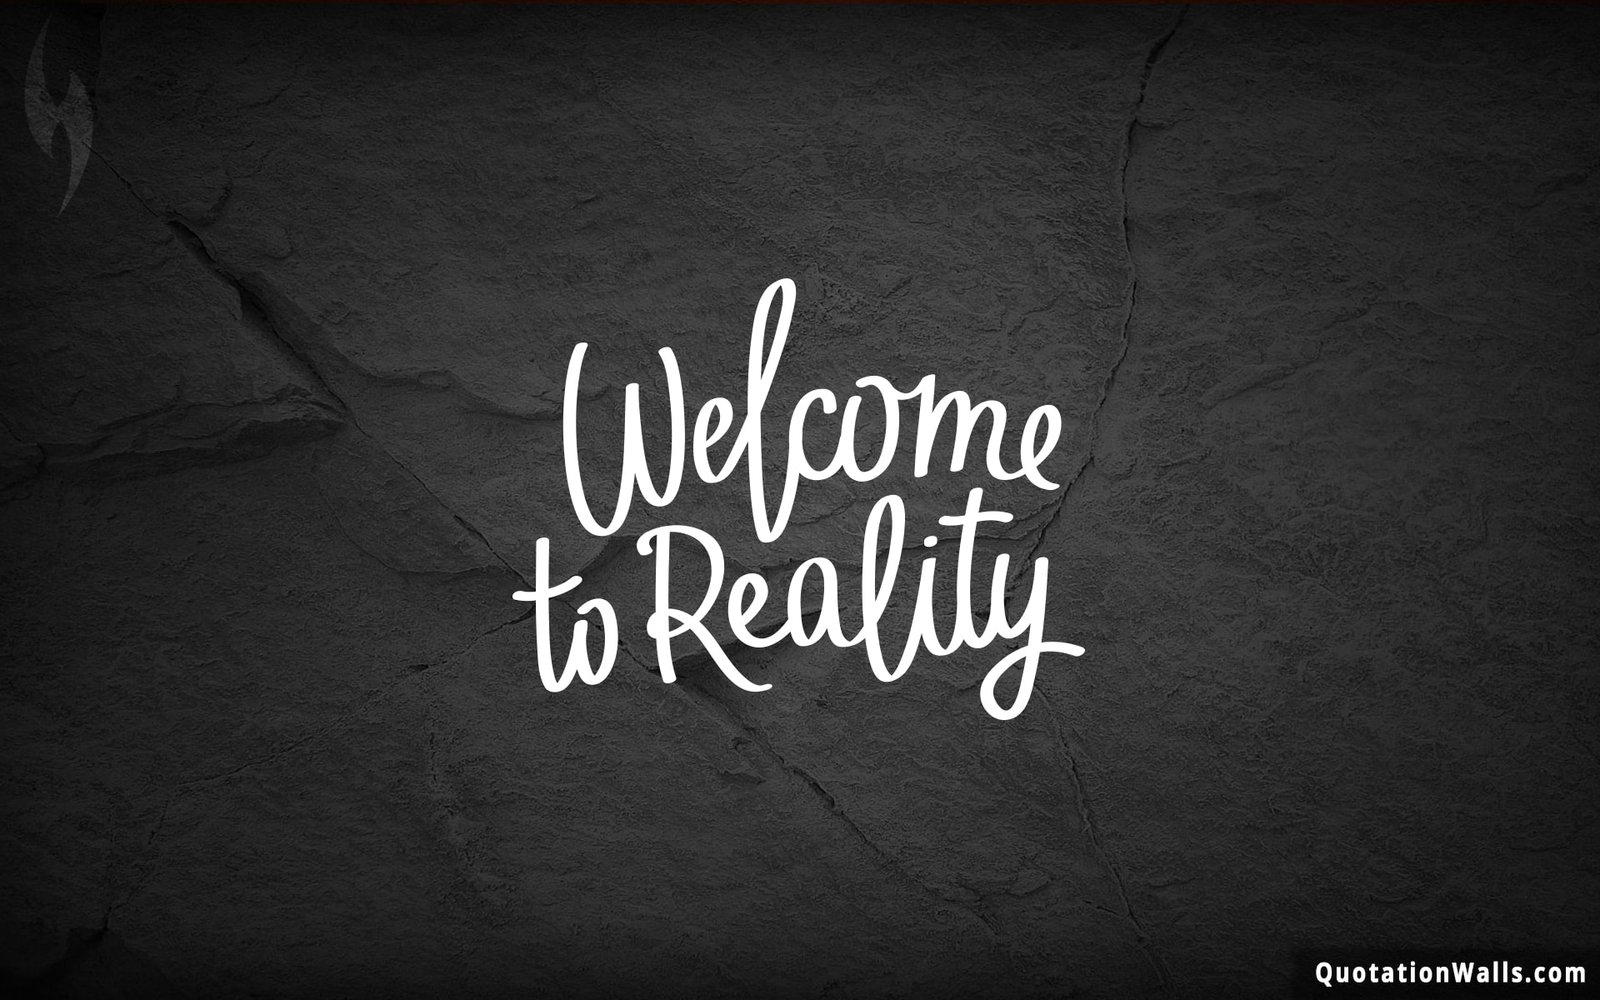 Welcome To Reality Life Wallpaper for Desktop - QuotationWalls